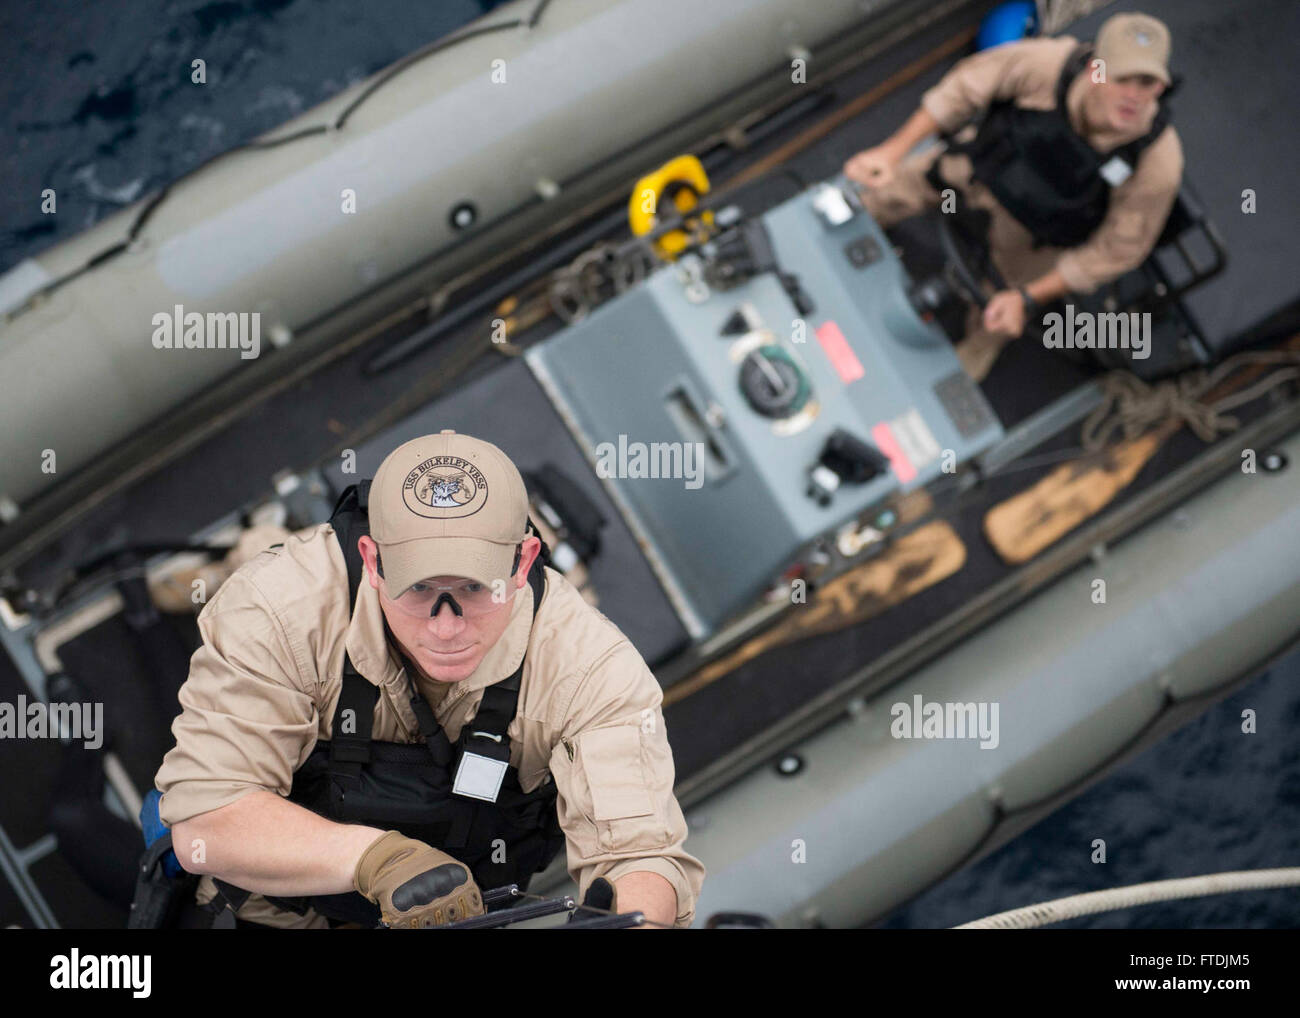 151209-N-AO823-118 MEDITERRANEAN SEA (Dec. 9, 2015) -- Fire Controlman 2nd Class E. Roys climbs aboard guided-missile destroyer USS Bulkeley (DDG 84) from a rigid hull inflatable boat during a visit, board, search and seizure training exercise. Bulkeley, part of the Harry S. Truman Carrier Strike Group, is conducting naval operations in the U.S. 6th Fleet area of operations in support of U.S. national security interests in Europe and Africa. (U.S. Navy photo by Mass Communication Specialist 2nd Class M.J. Lieberknecht/Released) Stock Photo